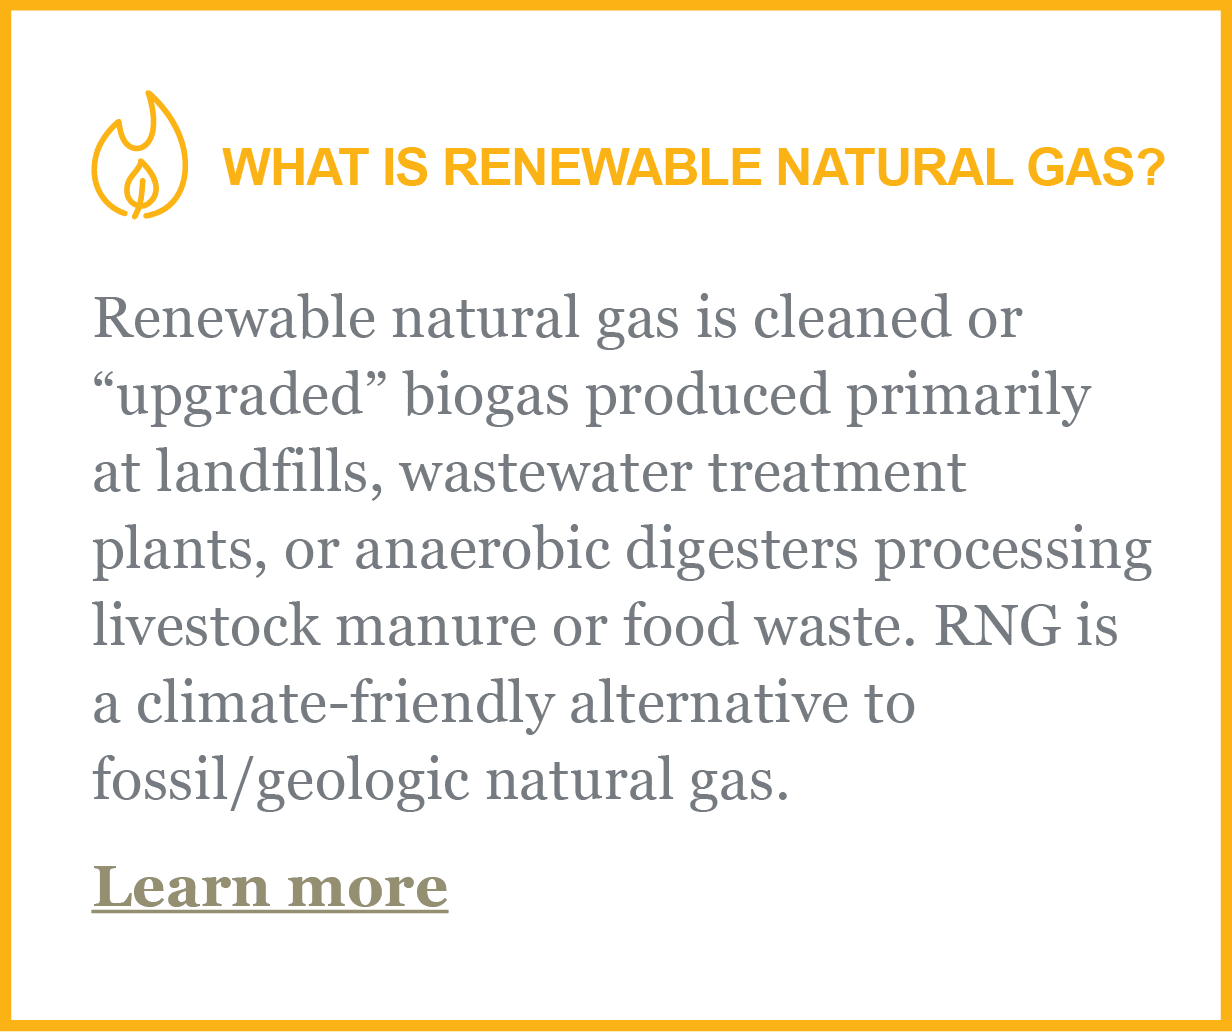 What is Renewable Natural Gas? Renewable natural gas is cleaned or upgraded biogas produced primarily at landfills, wastewater treatment plants, or anaerobic digesters processing livestock manure or food waste. RNG is a climate-friendly alternative to fossil/geologic natural gas. Click this image to learn more.